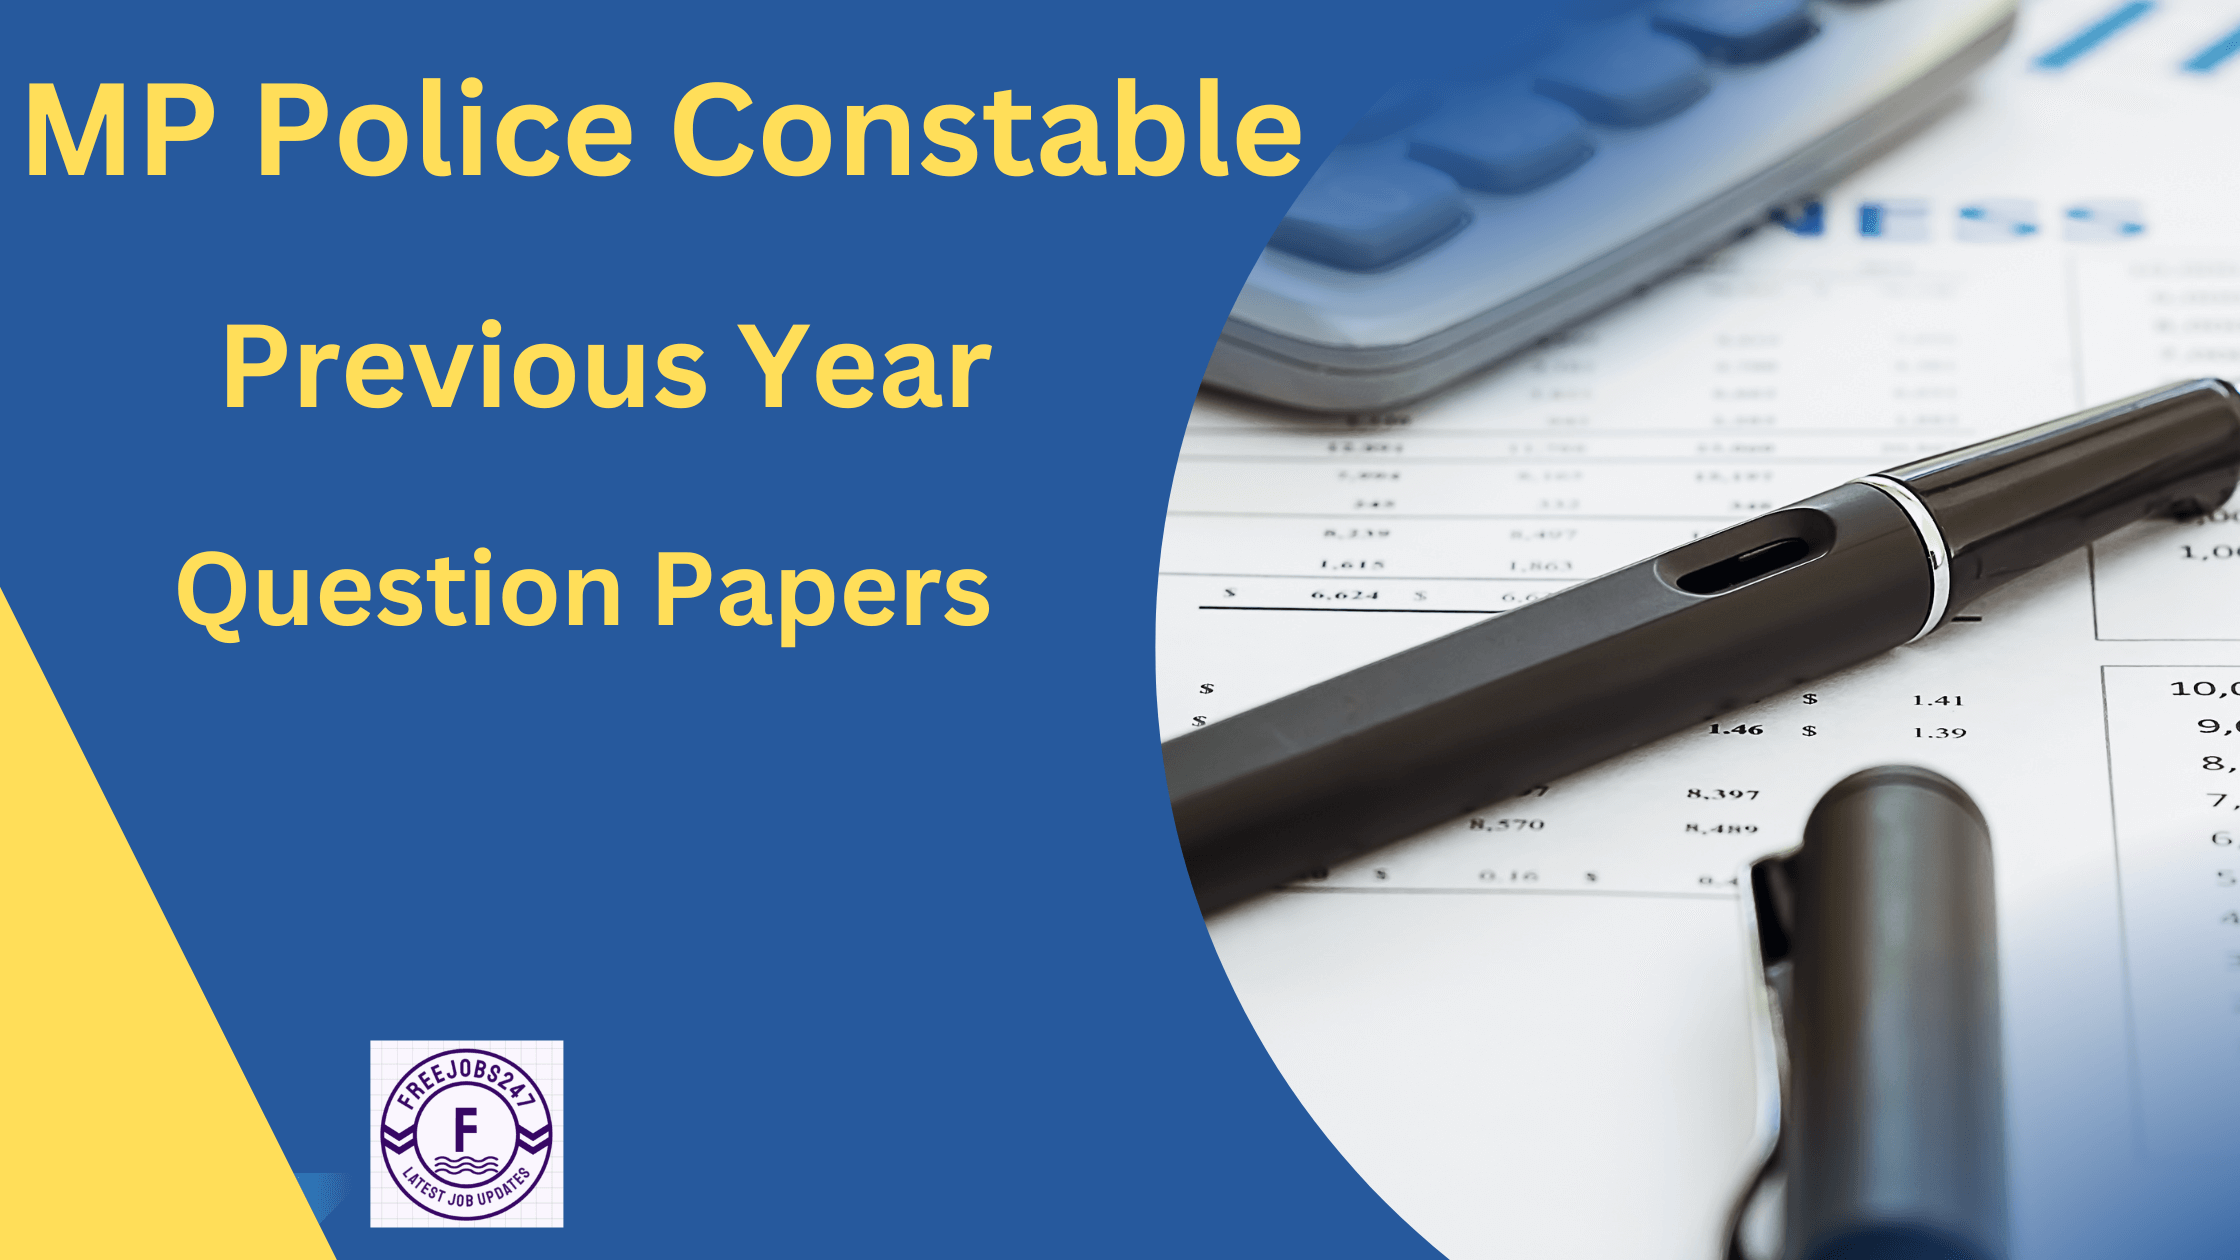 MP Police Constable Previous Year Question Papers